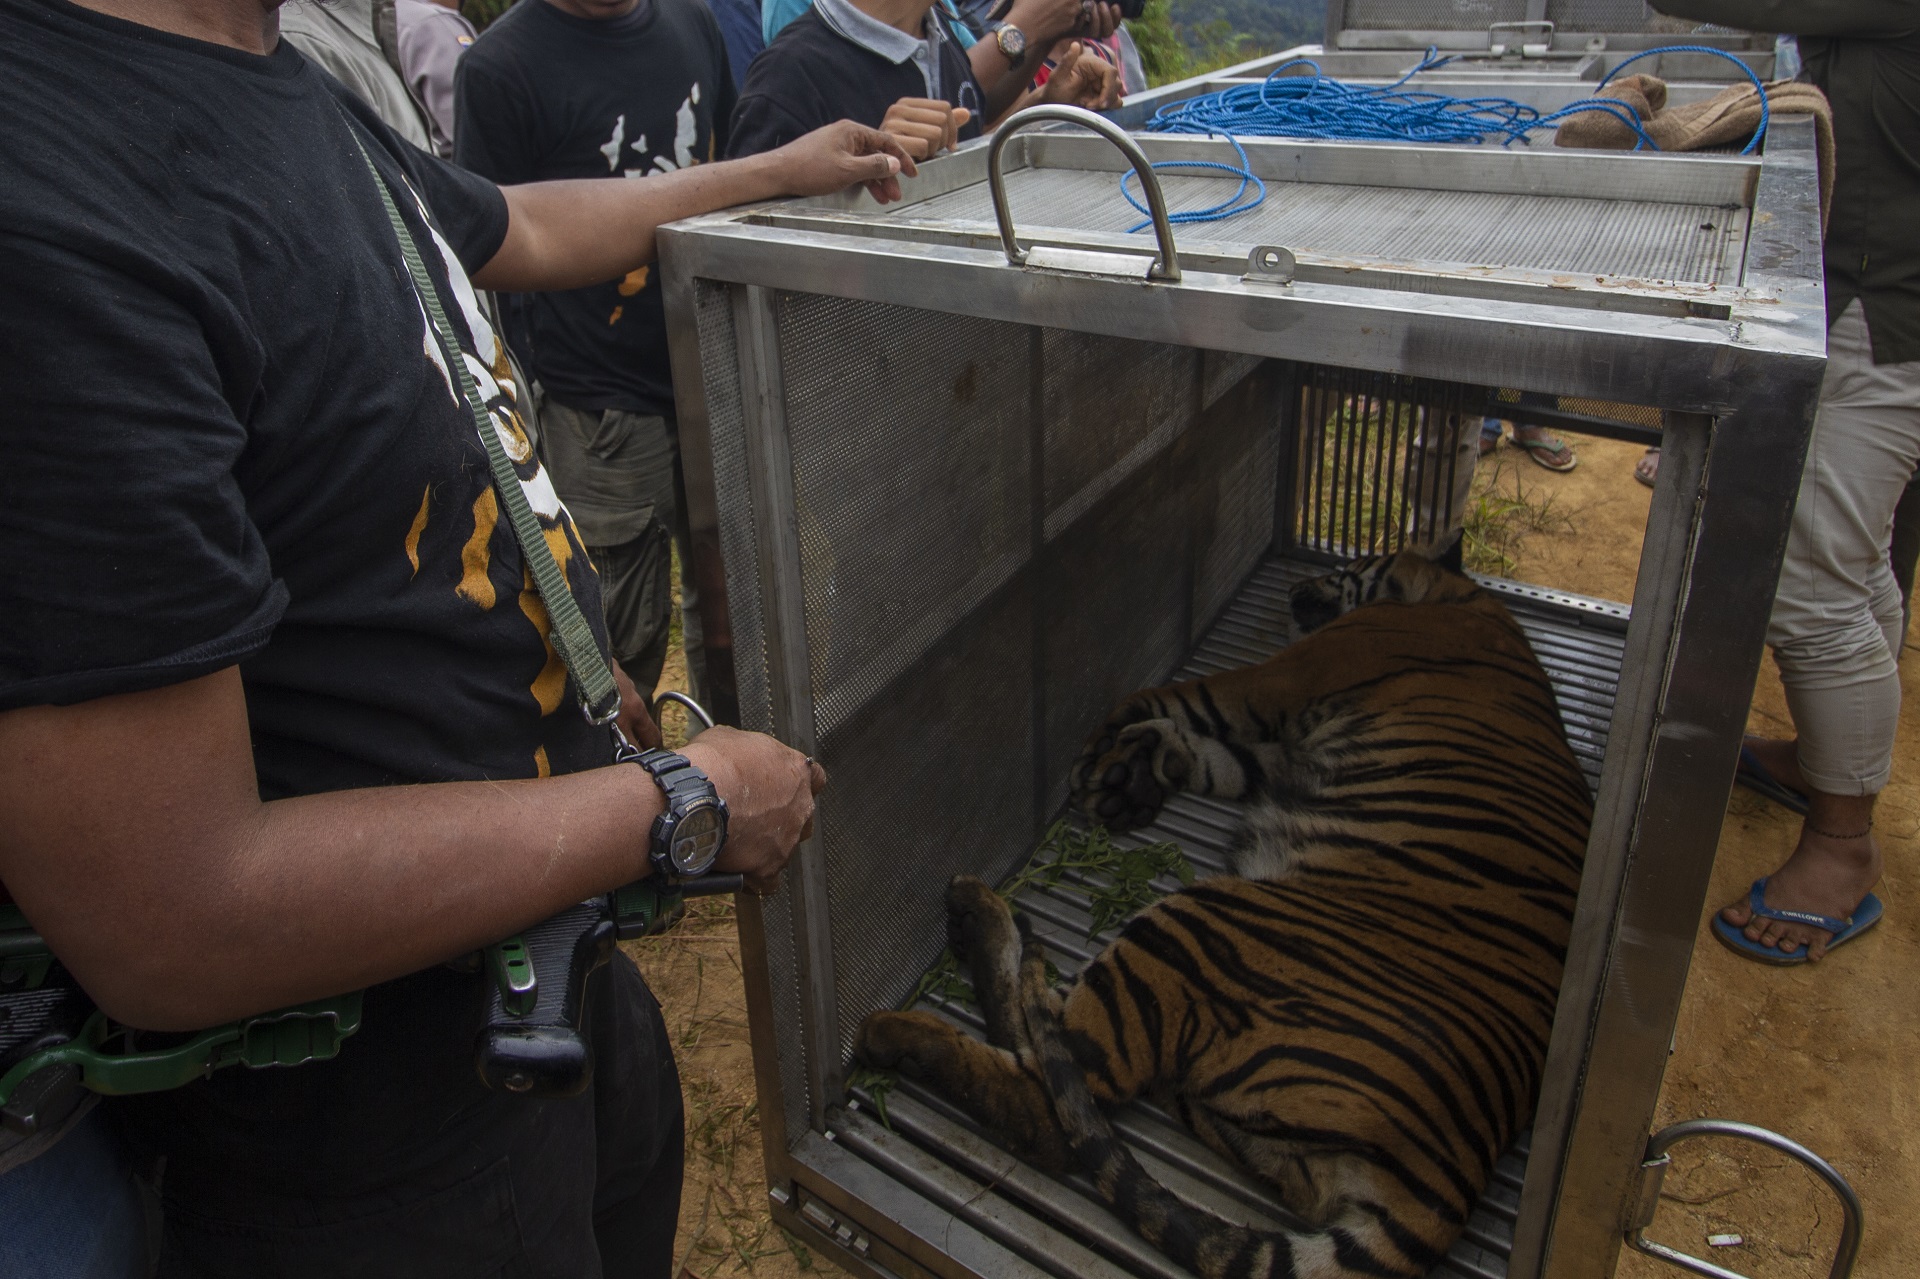 Rangers evacuate the male Sumatran Tiger 3 meters was caught in a trap in a forest area located roughly 500 meters from the village at Simpang Tanjung Nan IV subdistrict, Solok regency, West Sumatra province on December 7, 2020. Kariadil Harefa